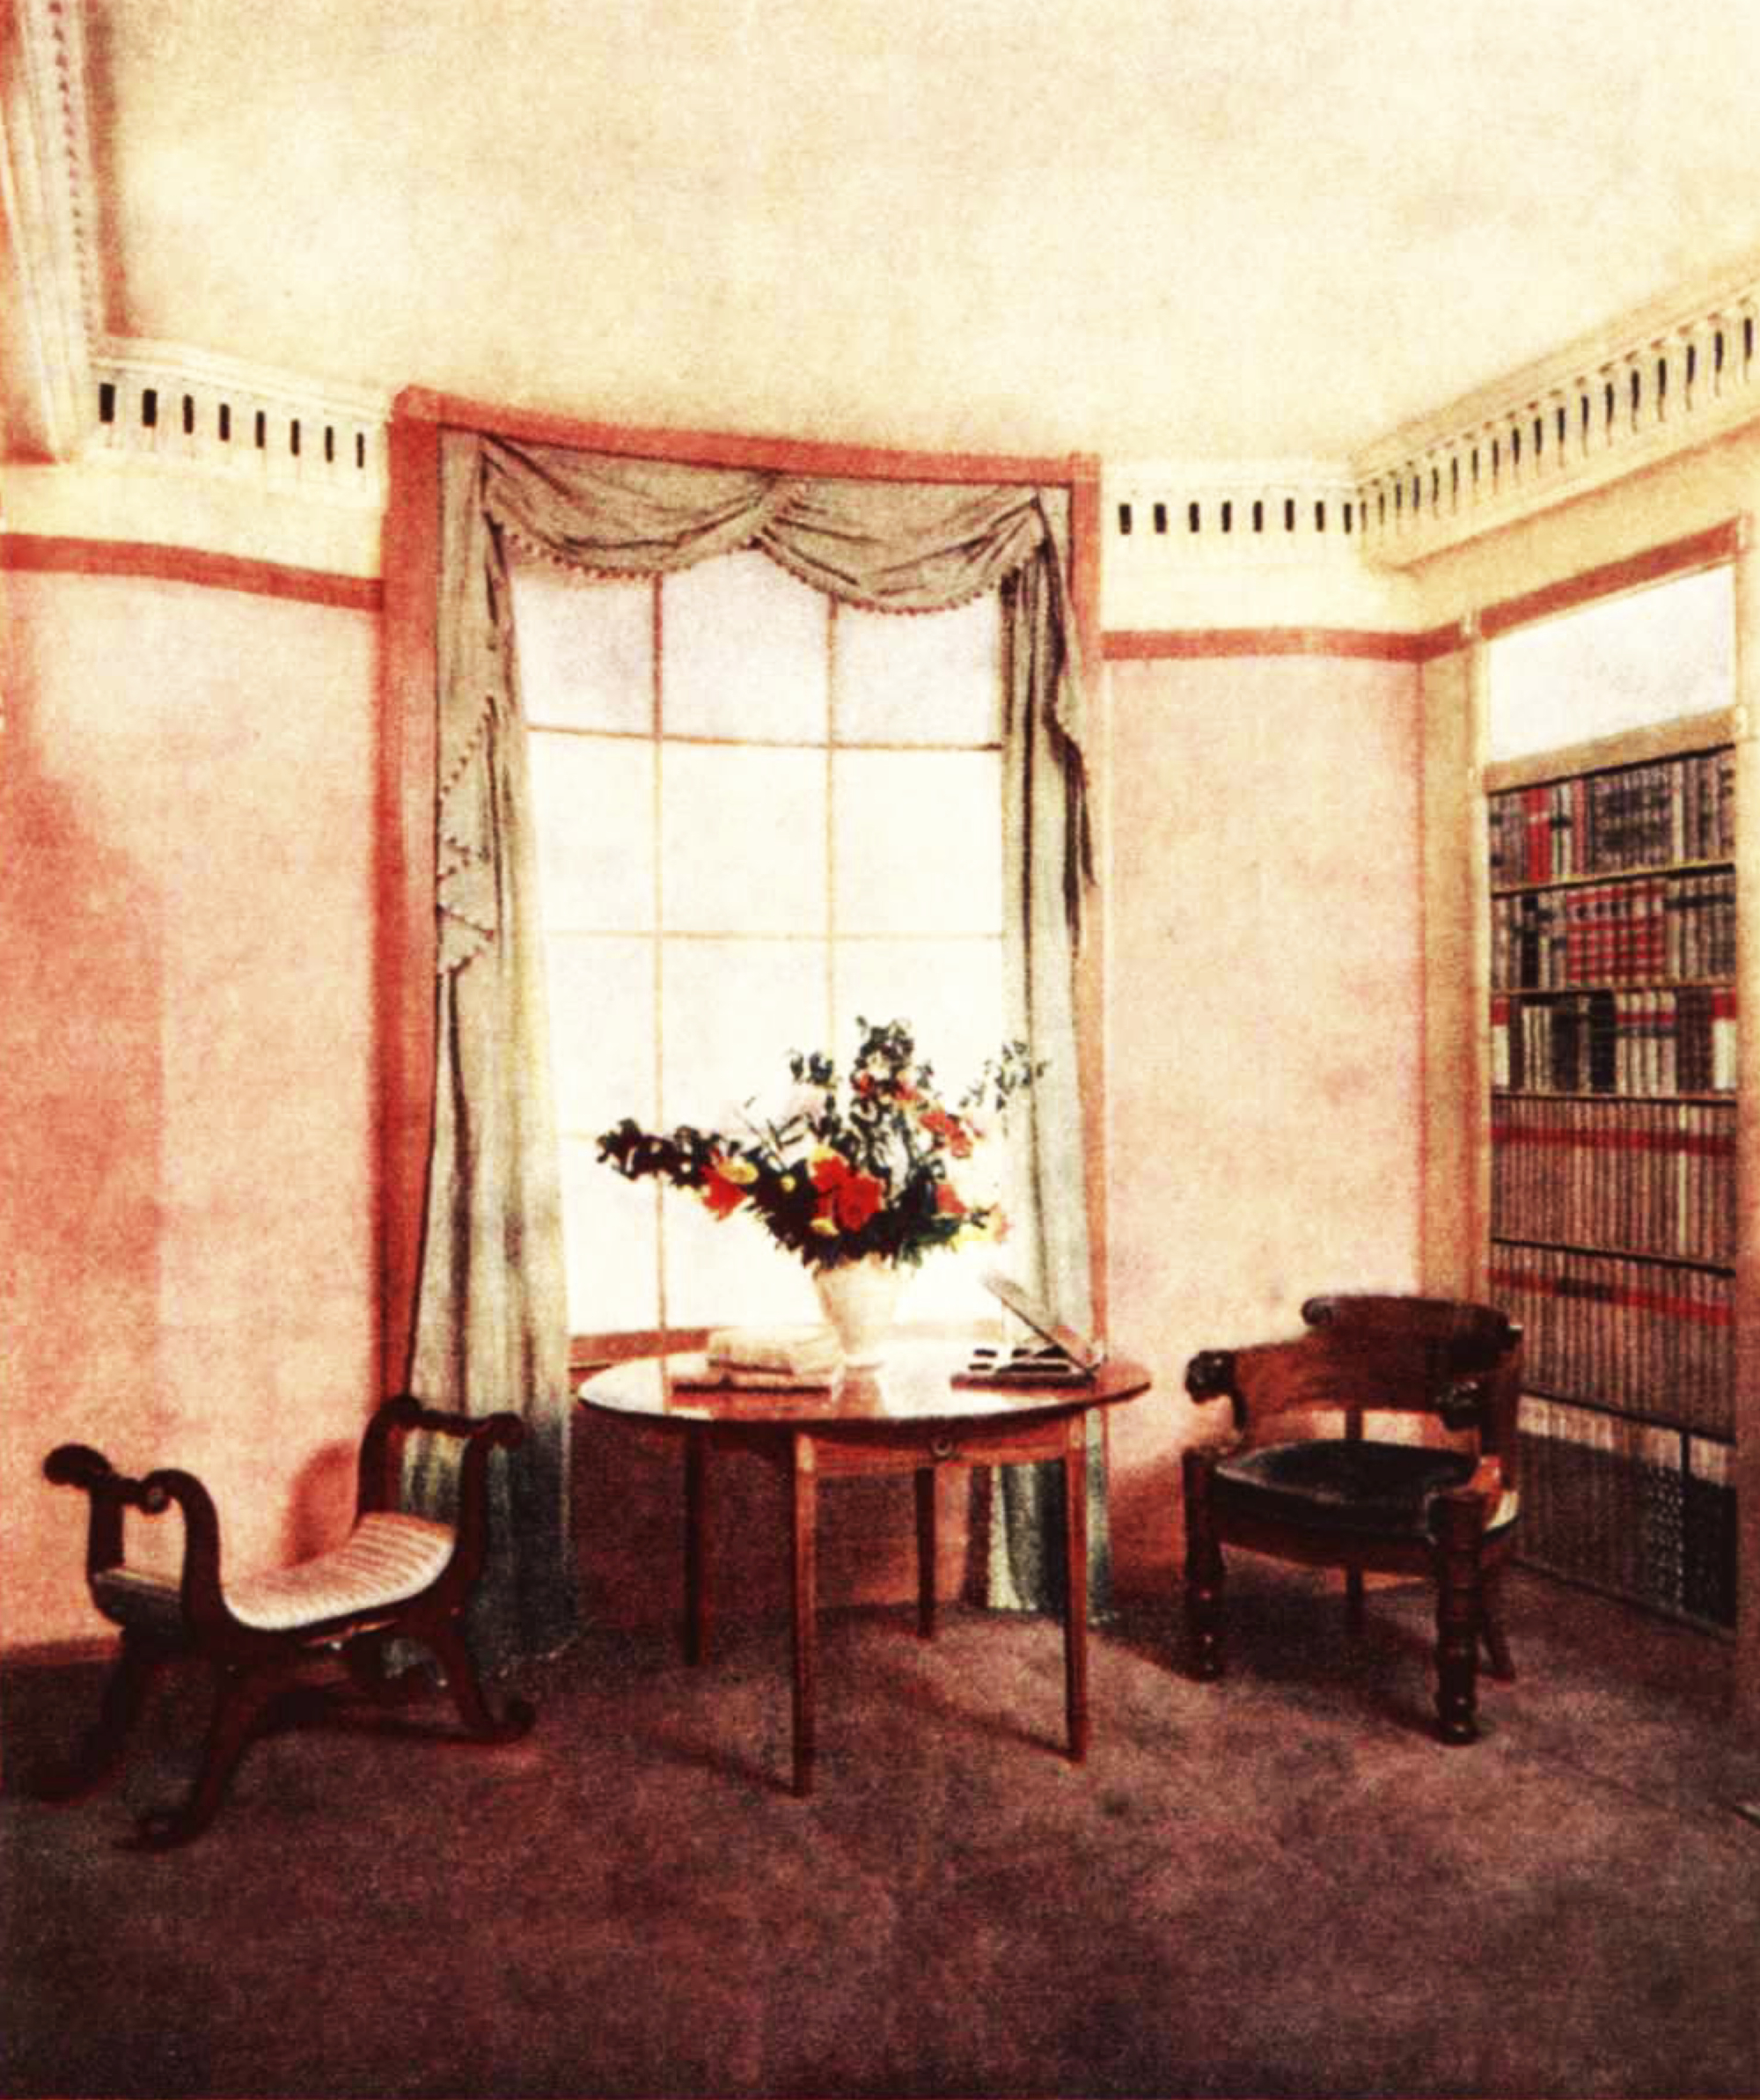 A colour picture of a cozy carpeted room with a bookcase, a curtained window, a round table and two easy chairs